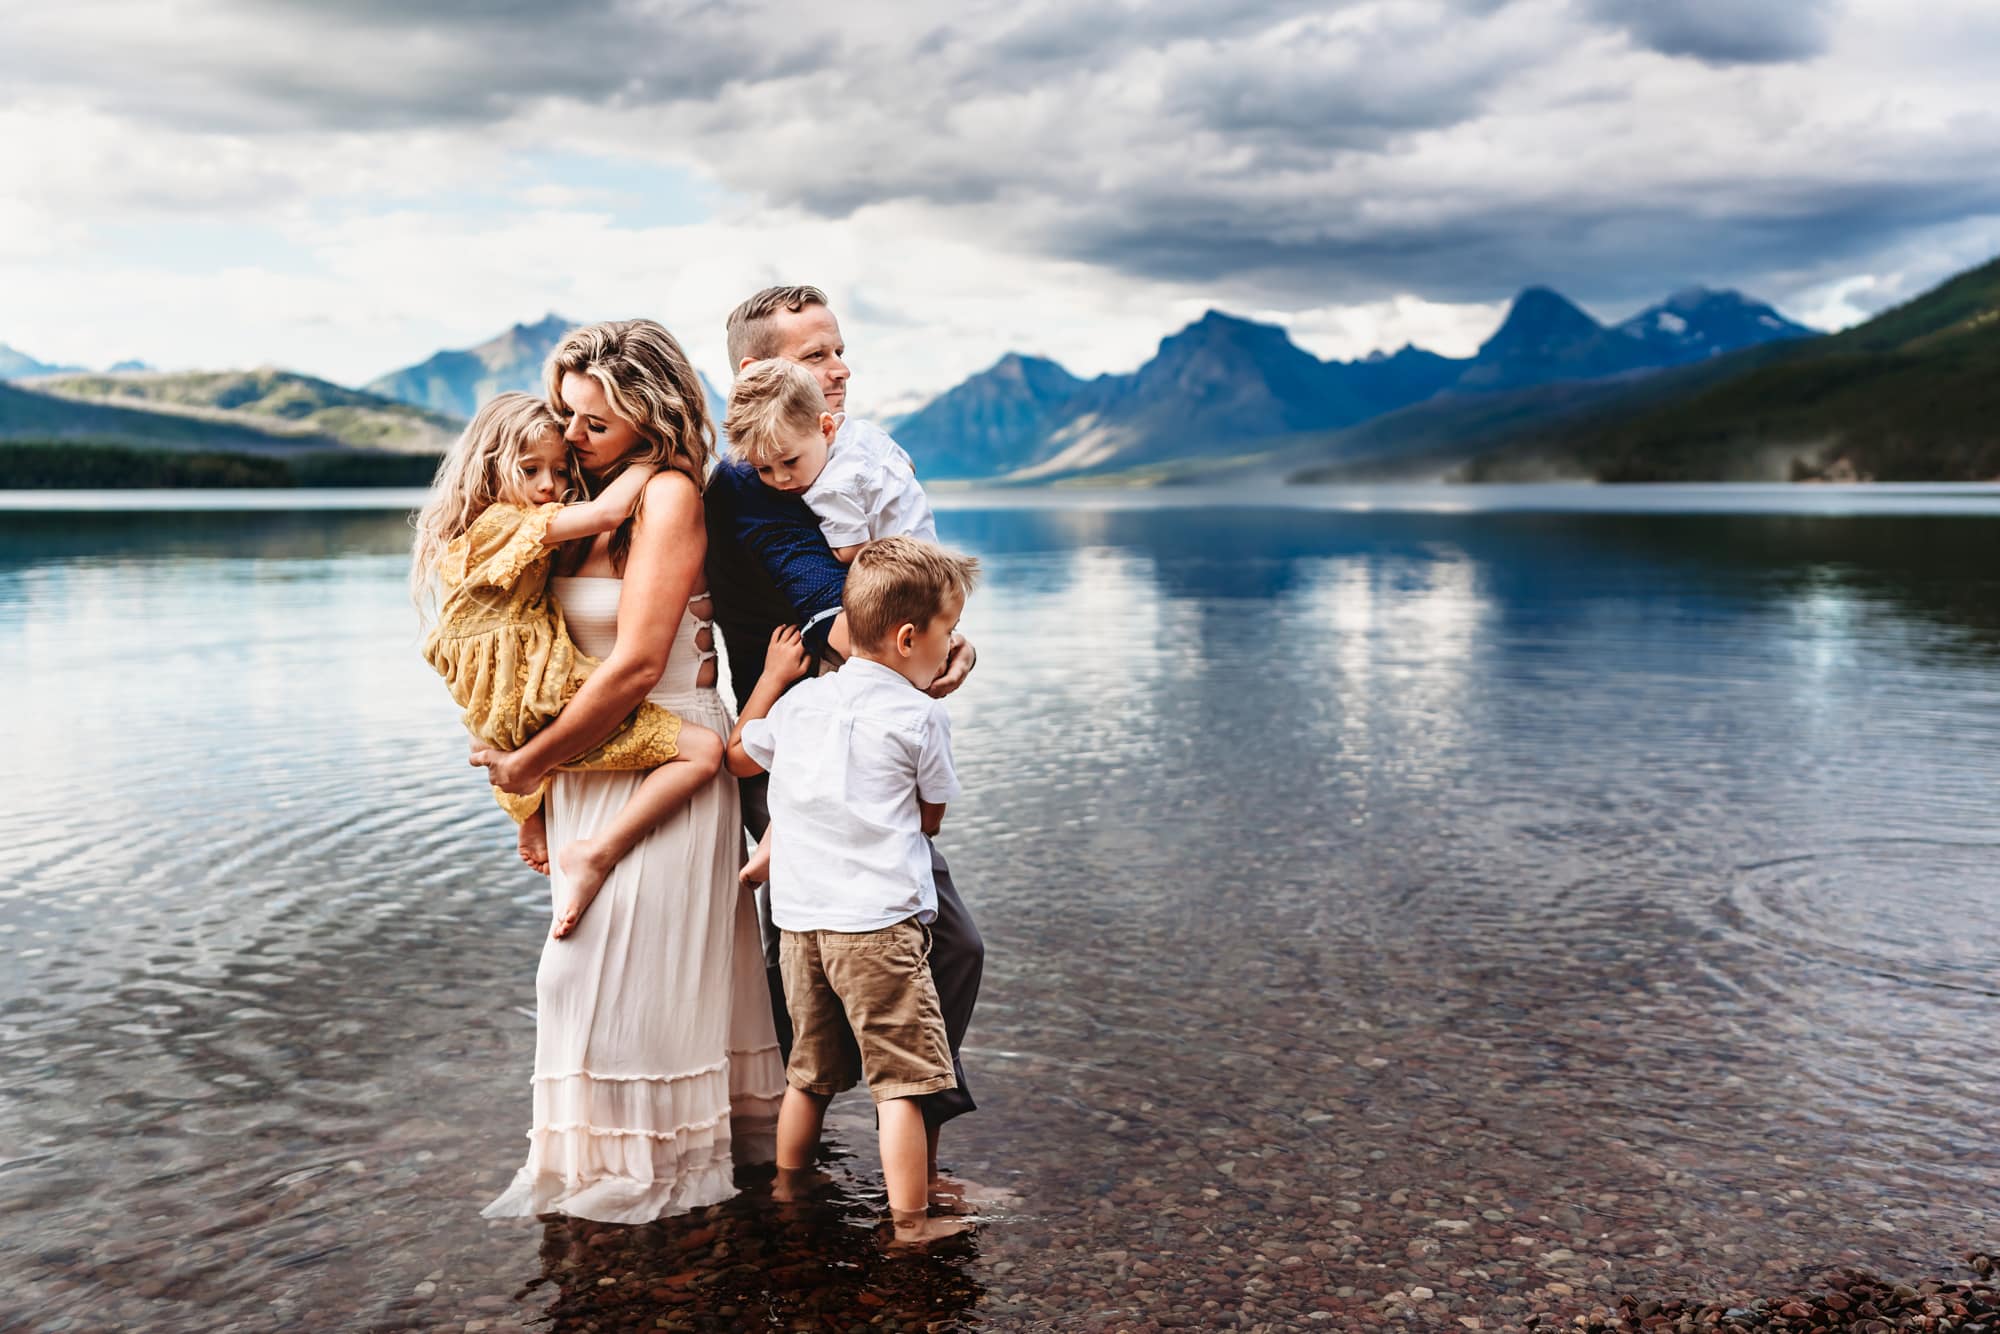 A family of 5 stands together on the shores of Glacier National Park's Lake McDonald during a Montana lifestyle family photography session by Love Michelle Photography.